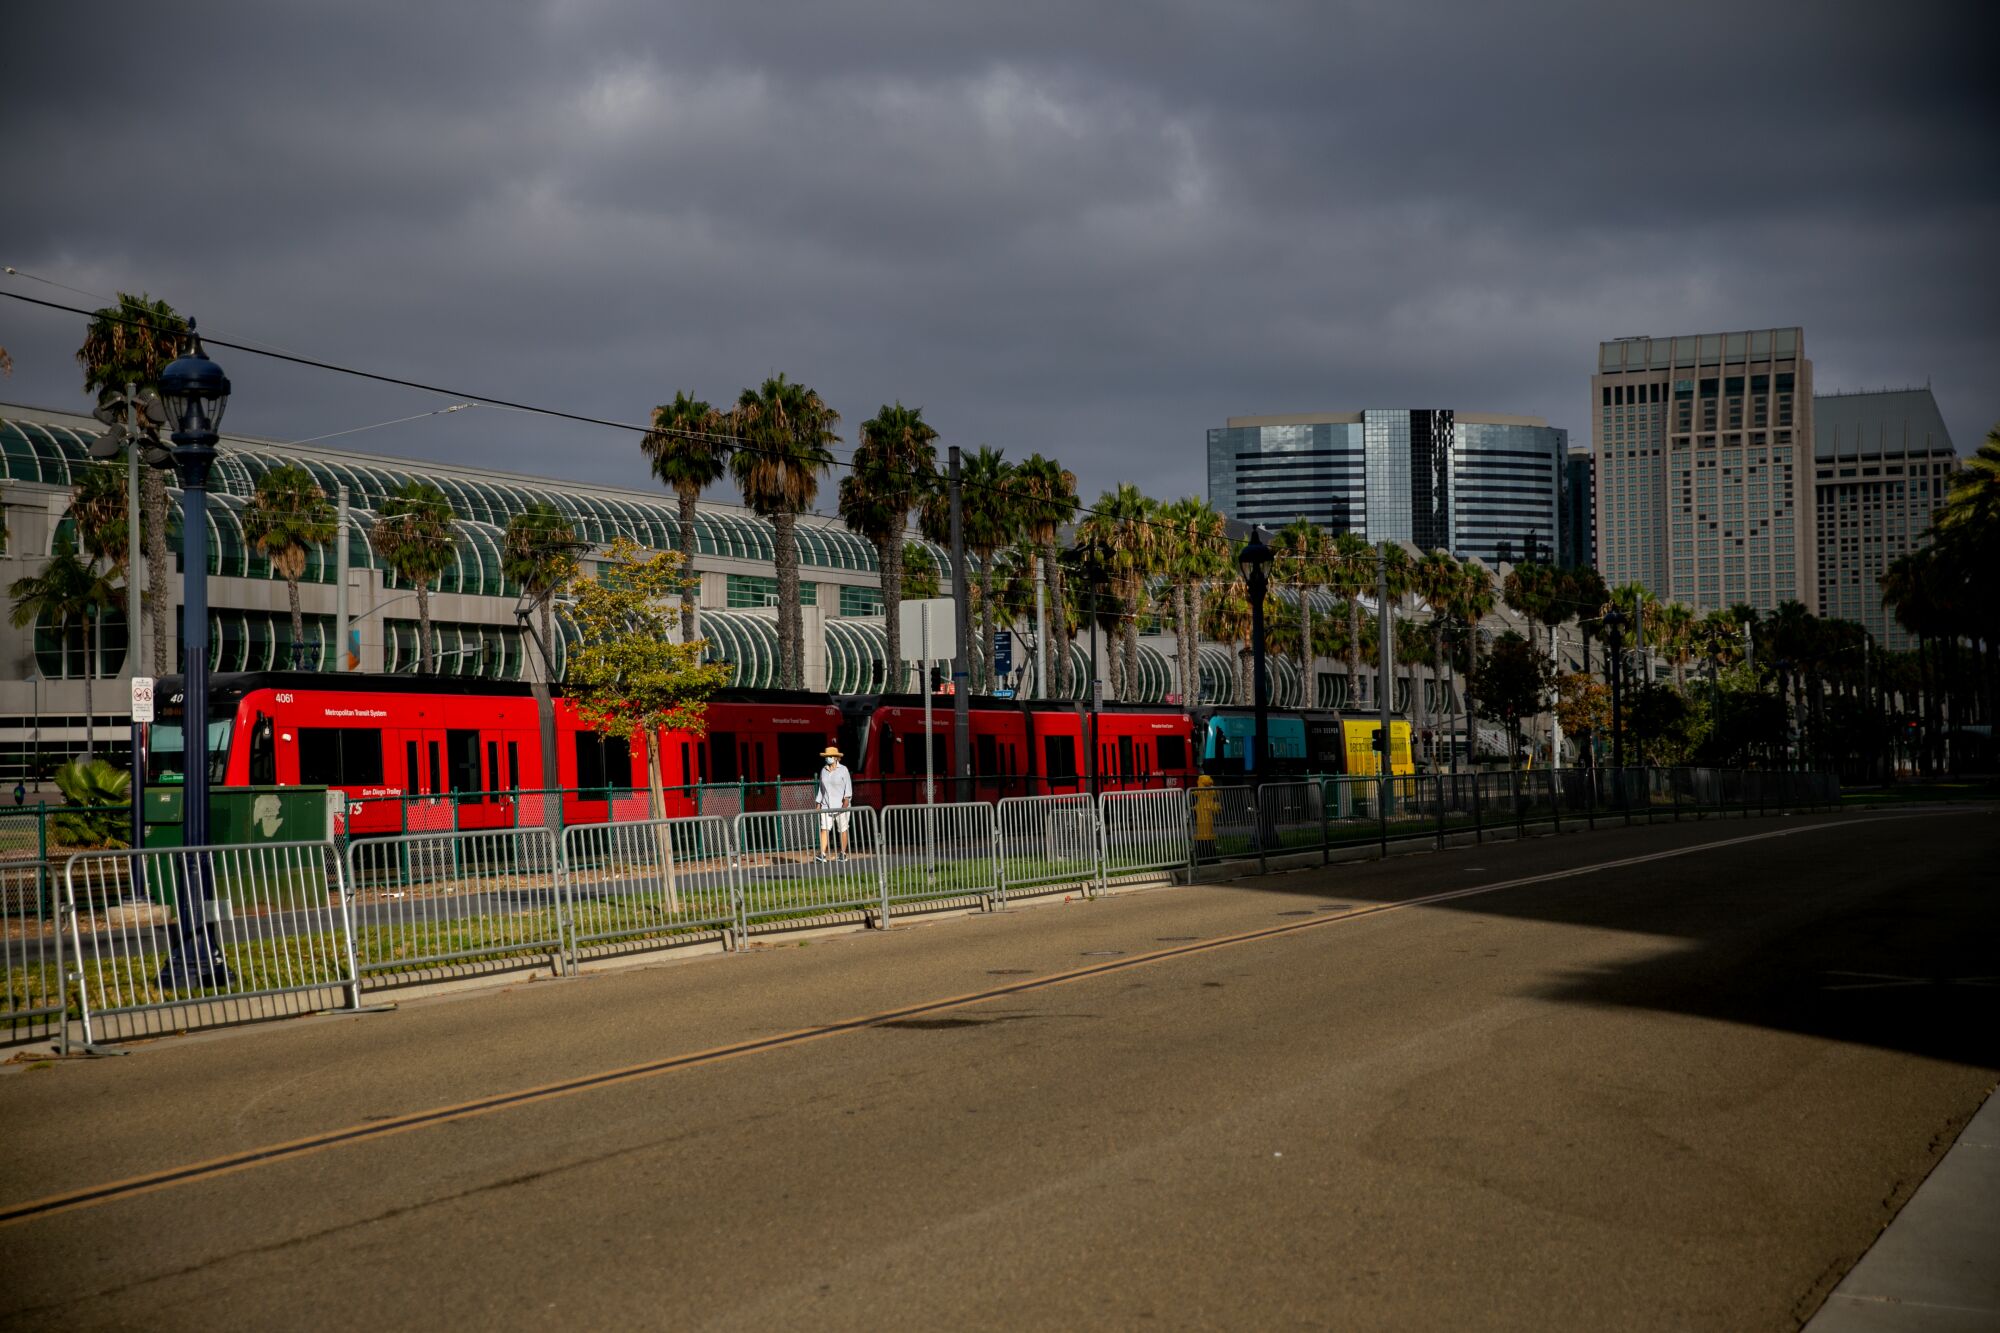 S San Diego Metropolitan Transit System trolley cars pull into the 12th and Imperial station